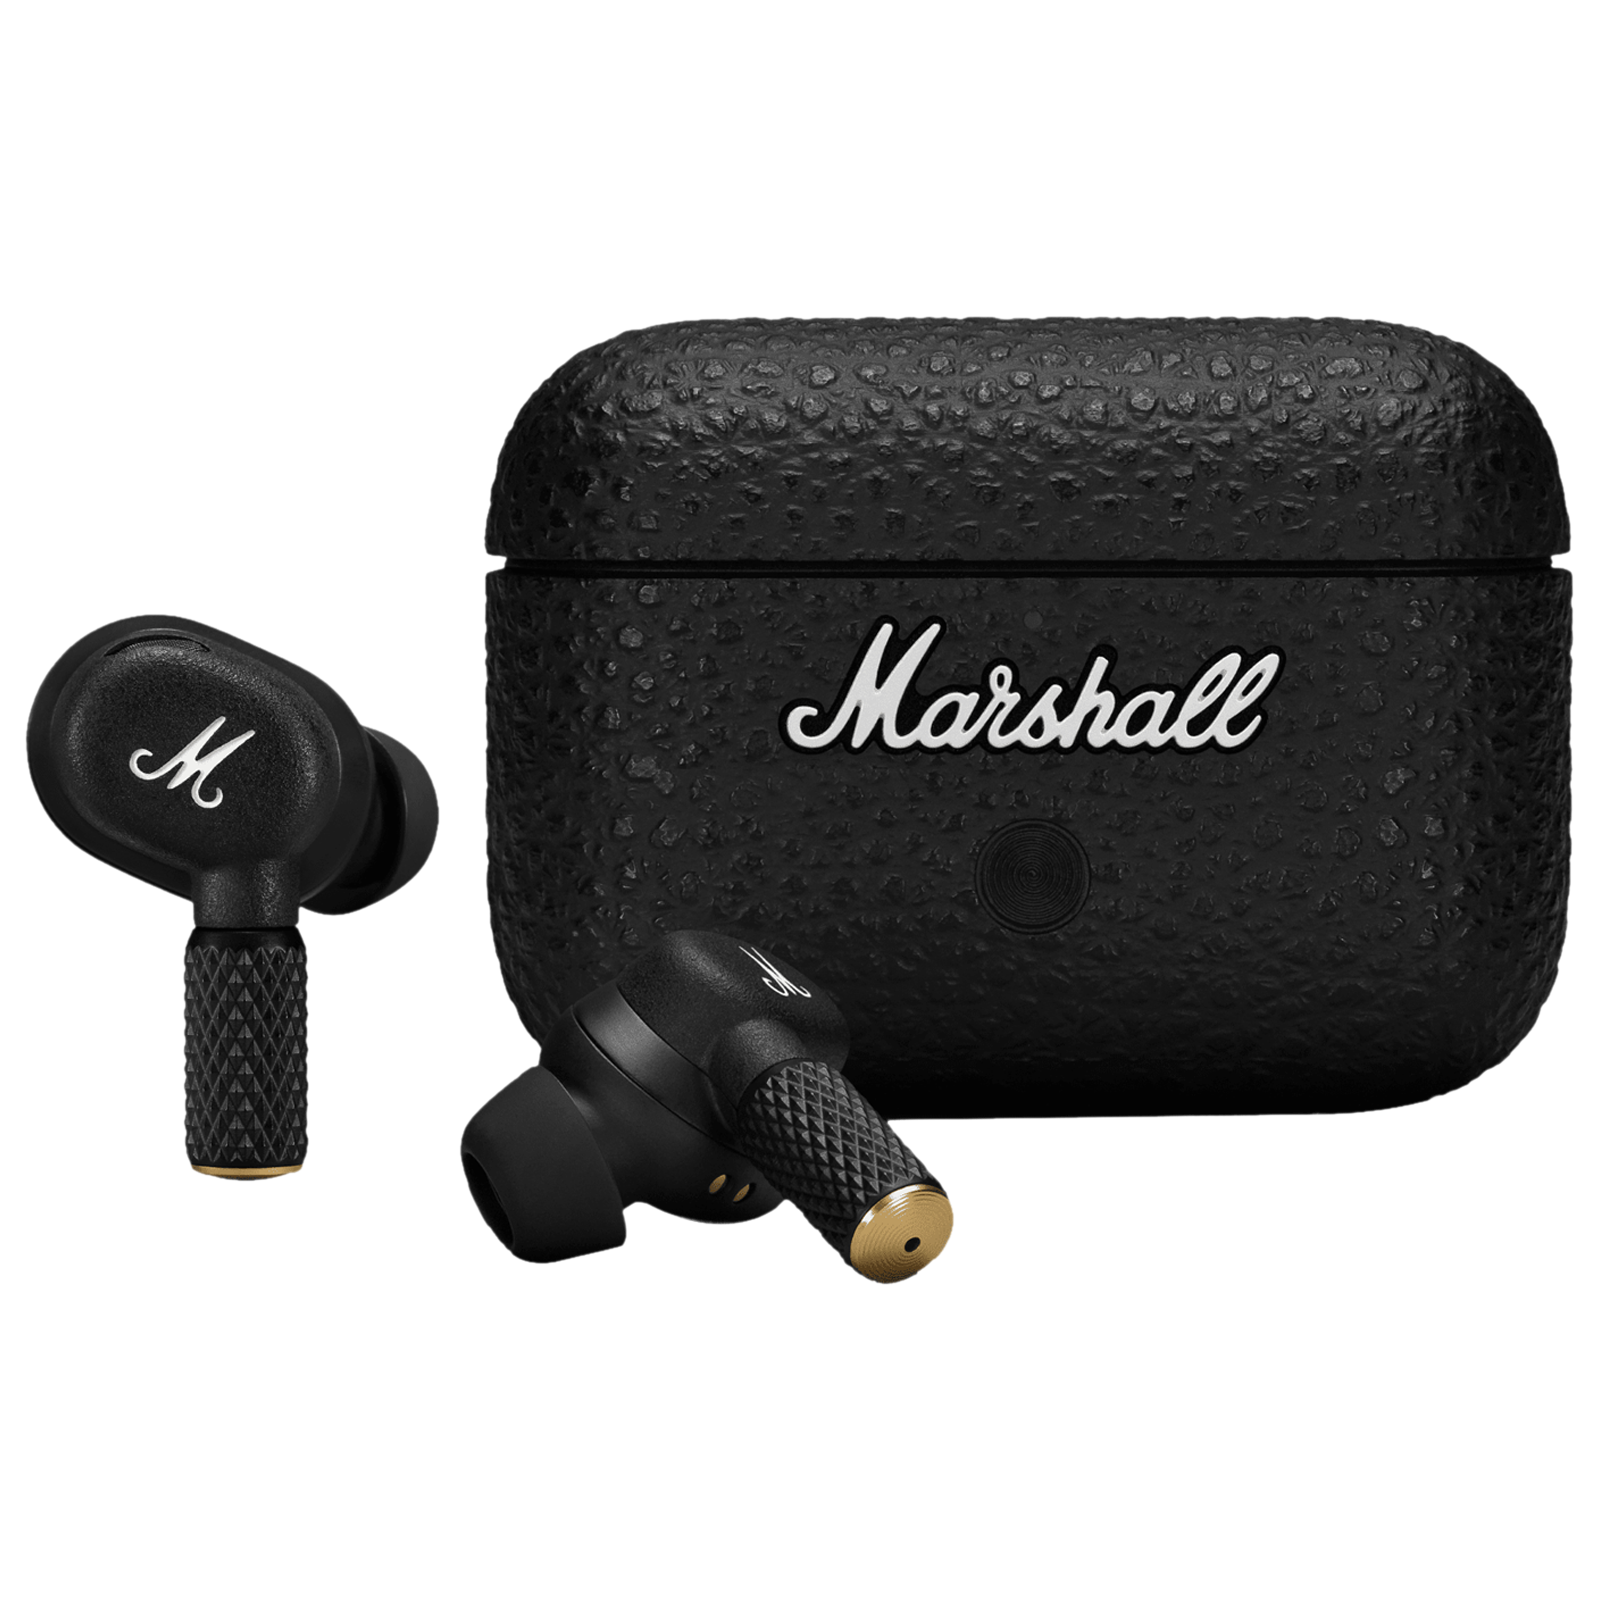 Marshall MOTIF II TWS Earbuds with Active Noise Cancellation (IPX5 Water Resistant, Wireless Charging, Black)